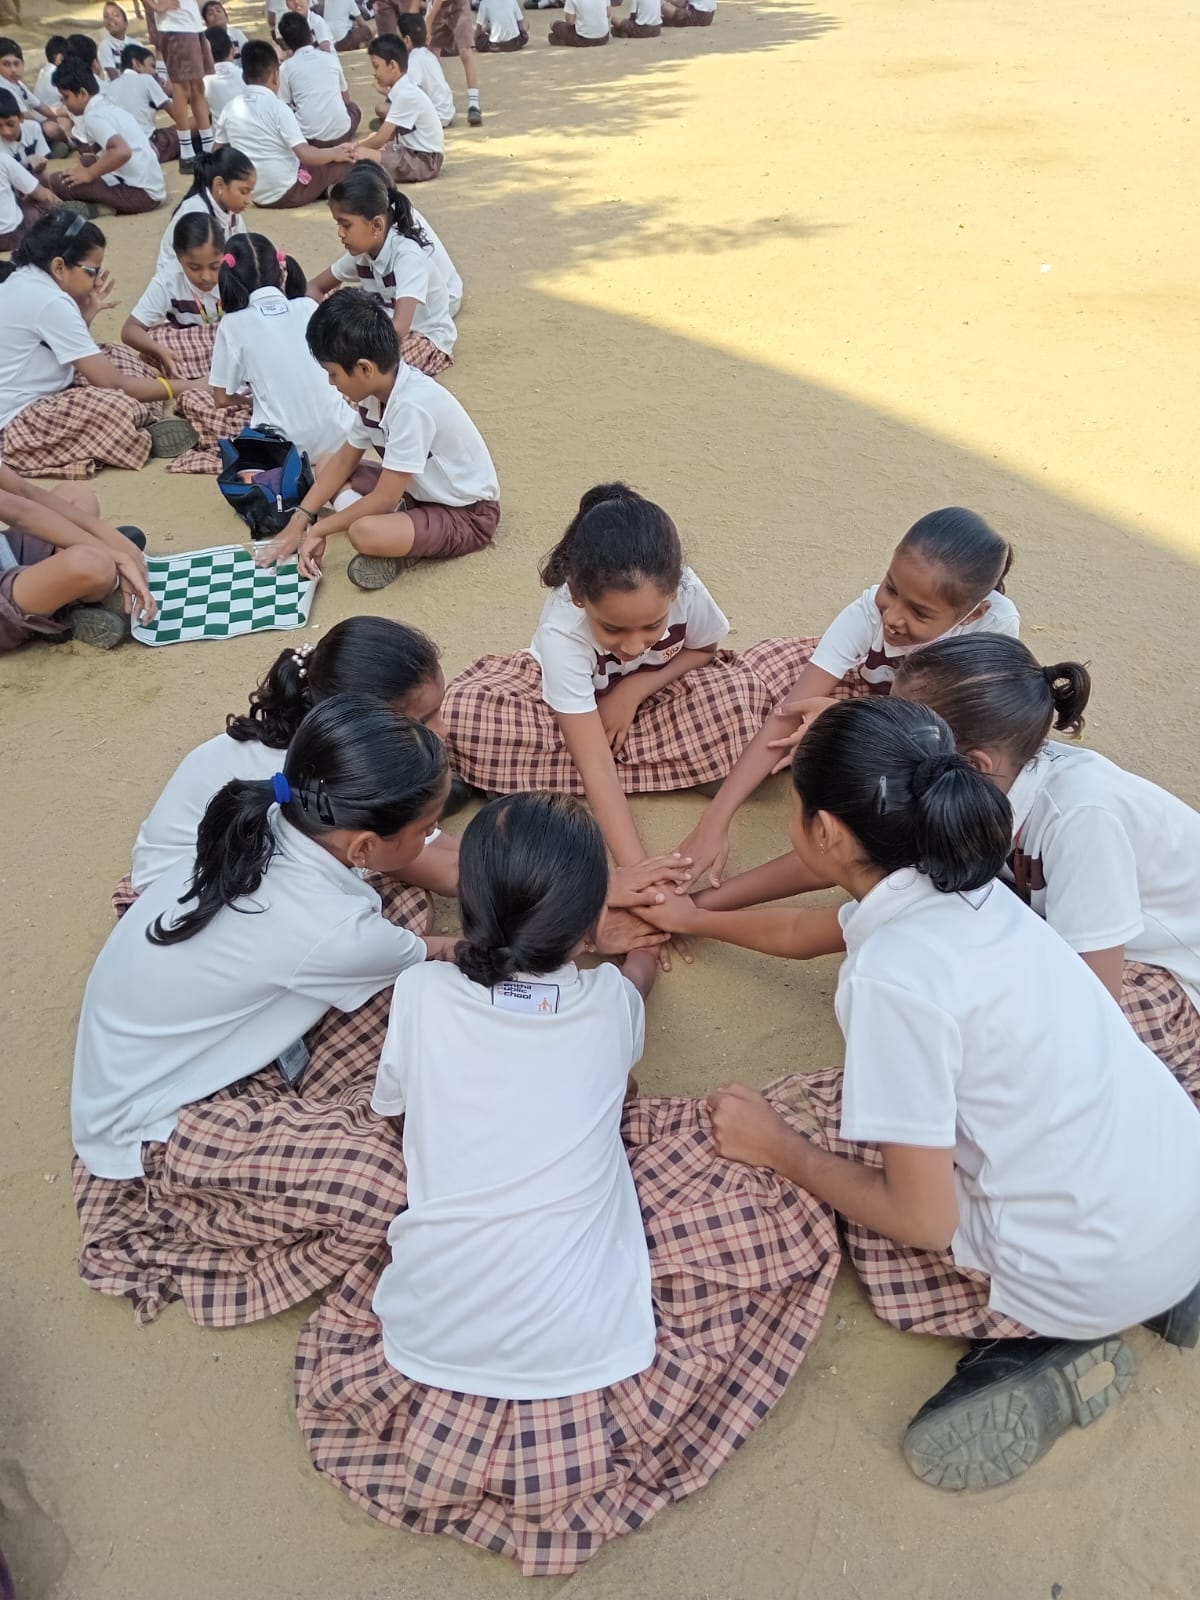 To wean off children from the addictive habit of playing with mobiles, Class.4 children were encouraged to try their hands at traditional games like palanguzhi, paramapadam, chess, etc.